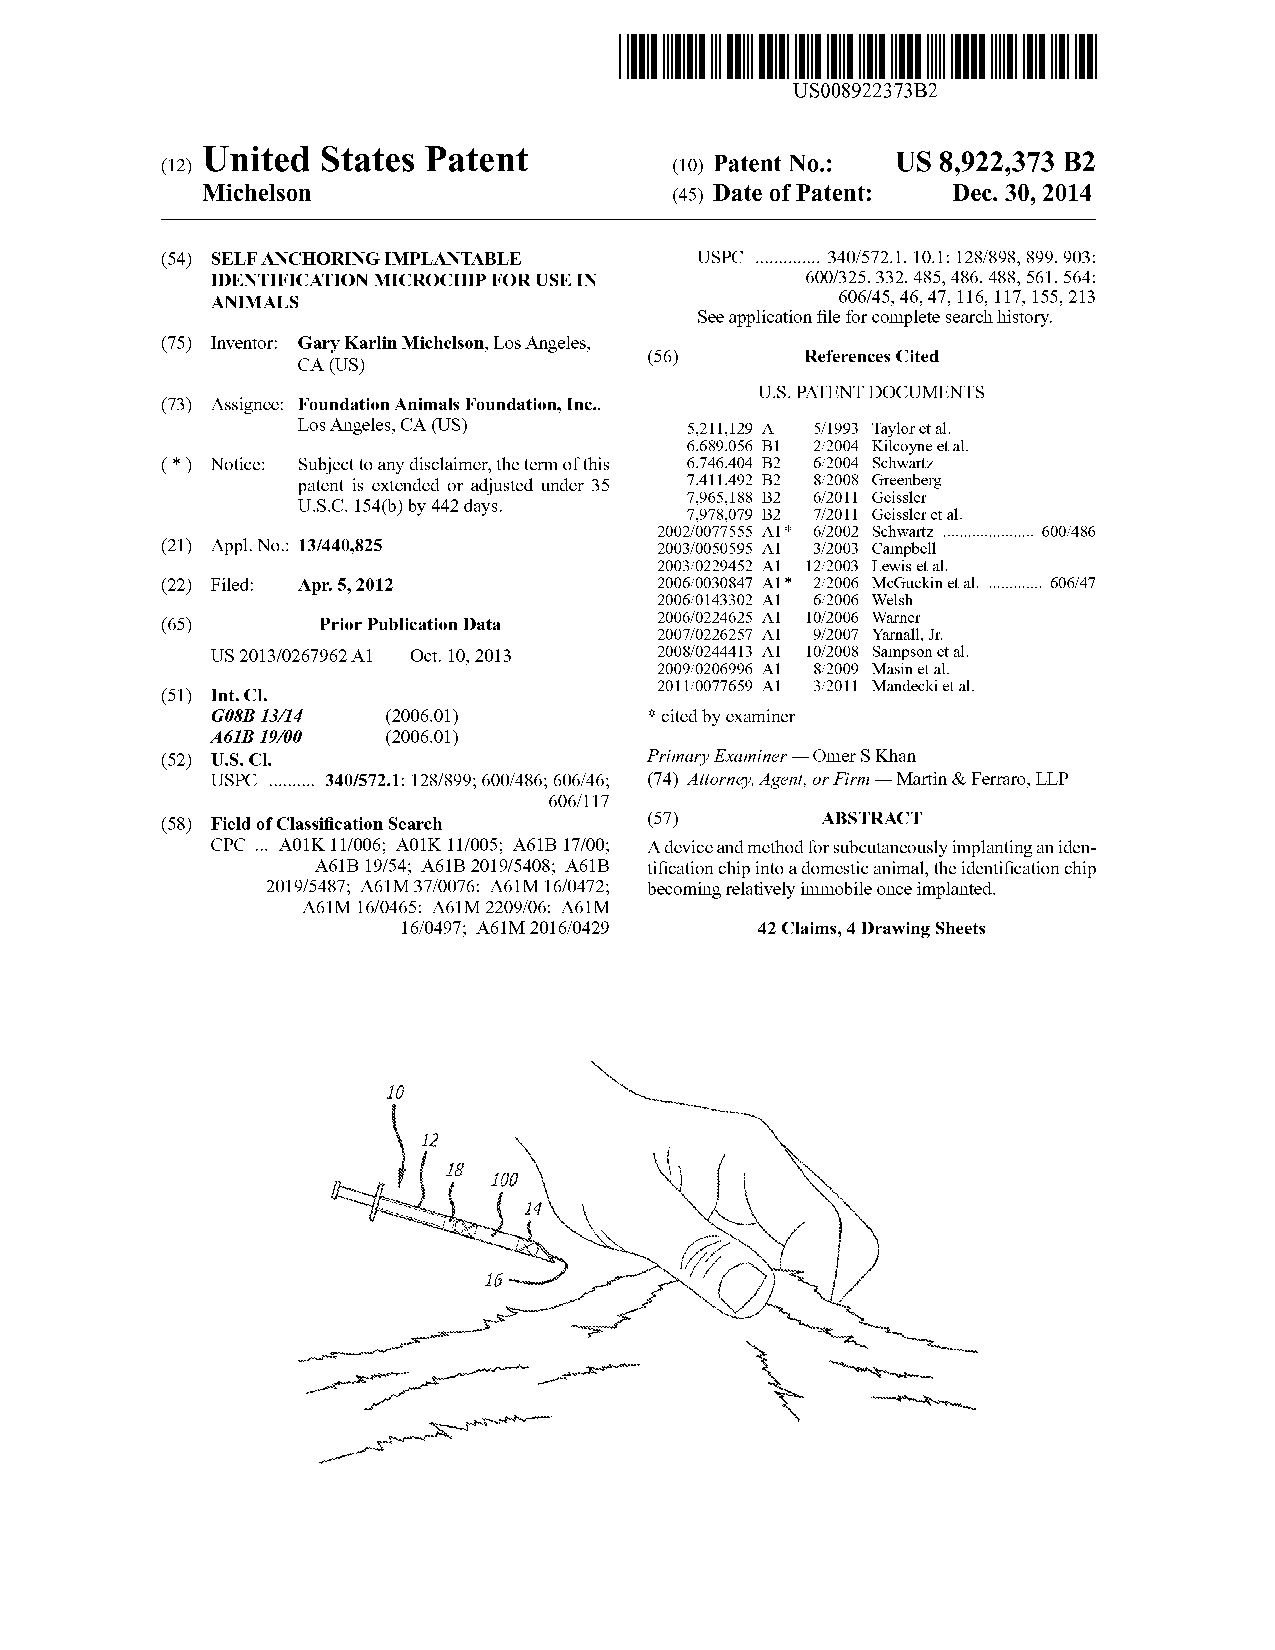 Self anchoring implantable identification microchip for use in animals - Patent 8,922,373